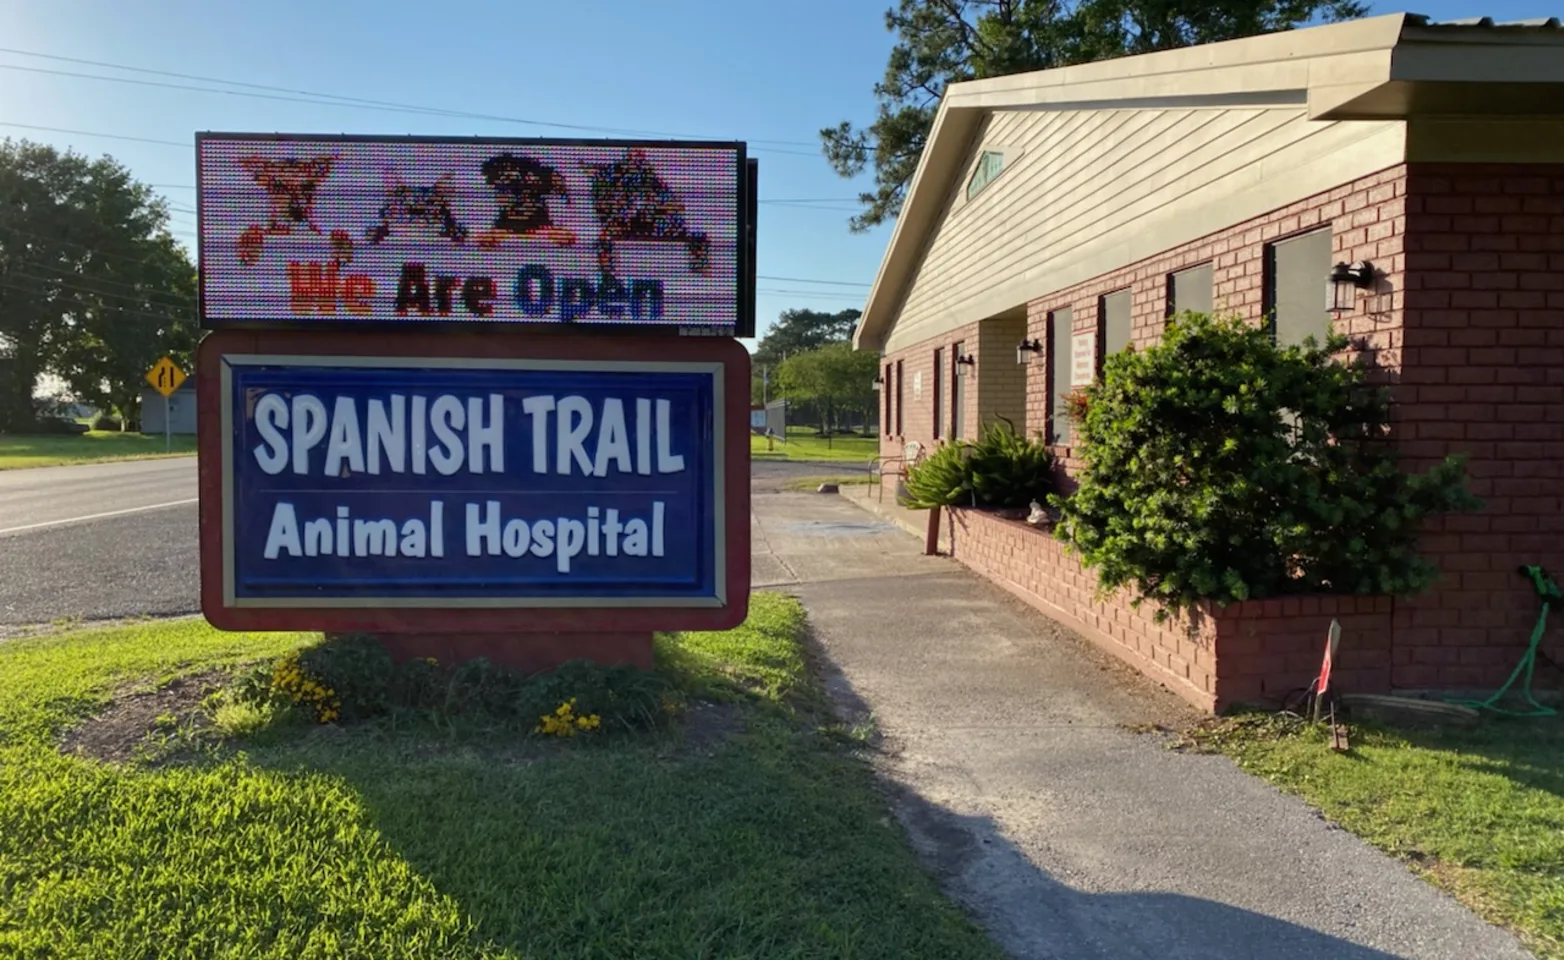 Spanish Trail Animal Hospital's front of their building which consist of redbricks and a tan roof with their signage on the right side of the picture